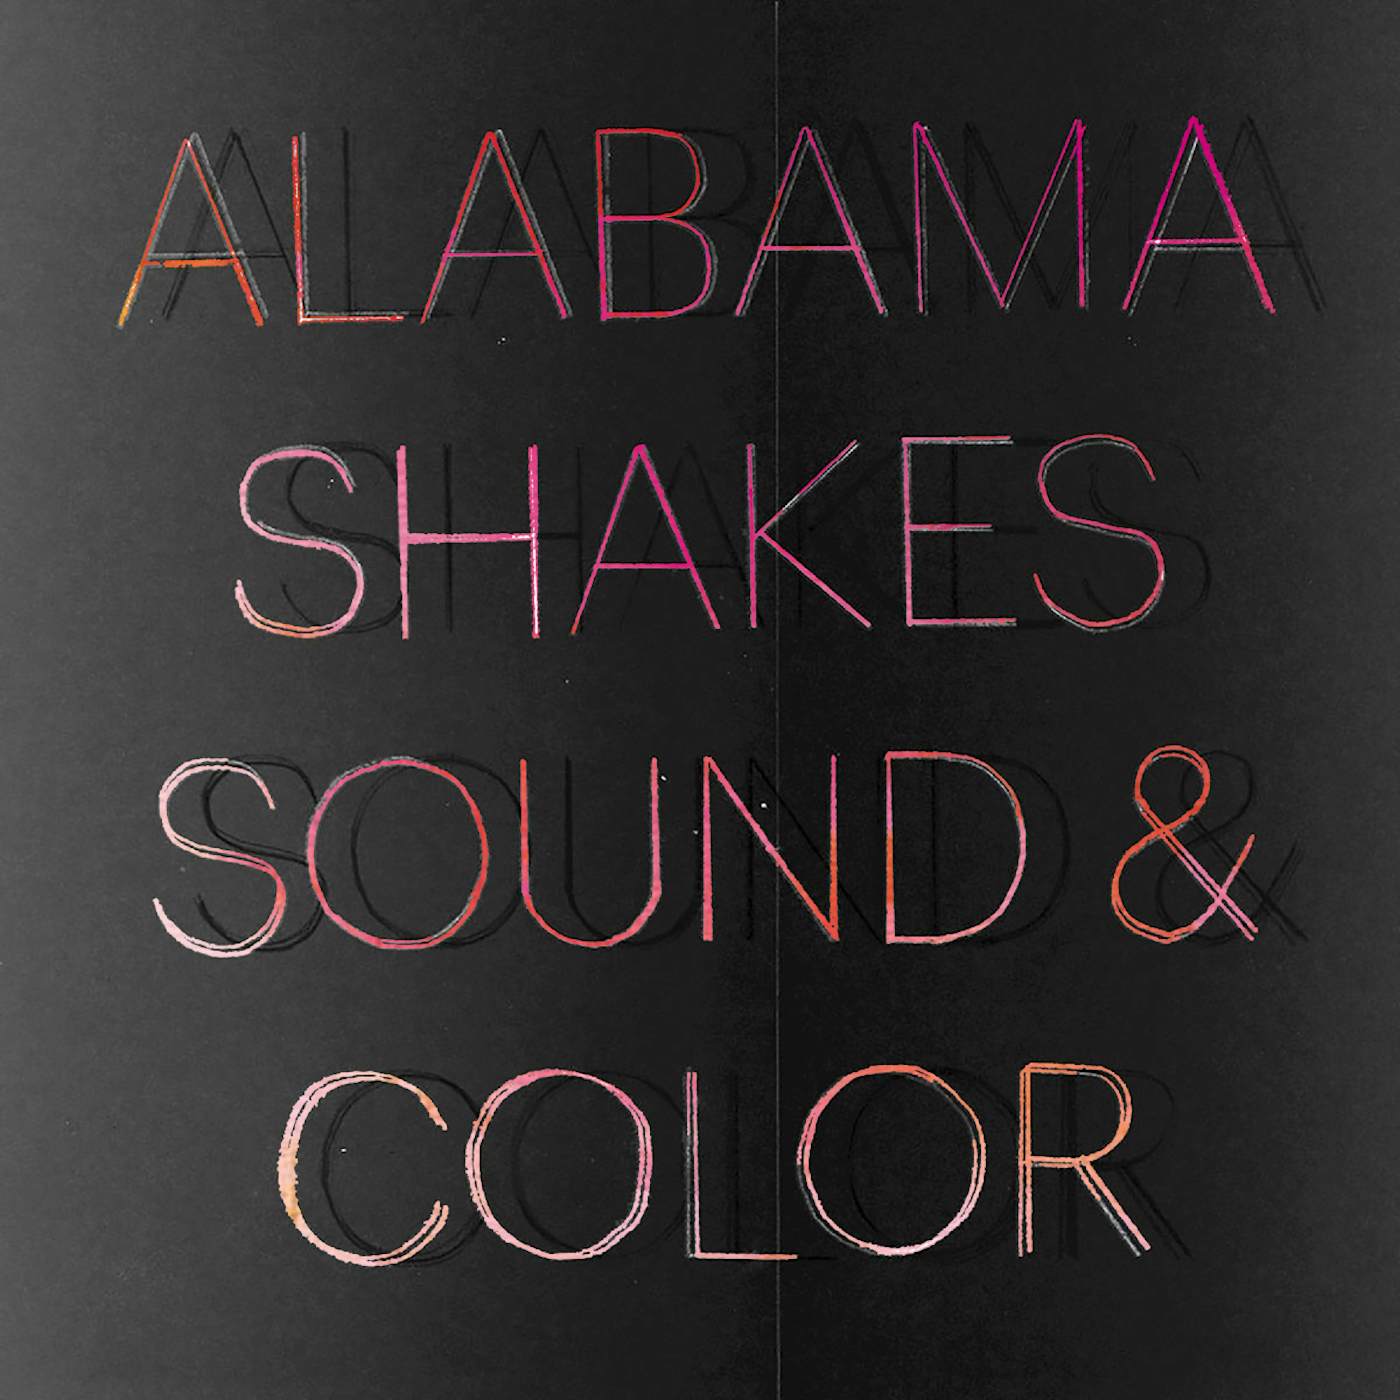 Alabama Shakes Sound & Color Deluxe CD